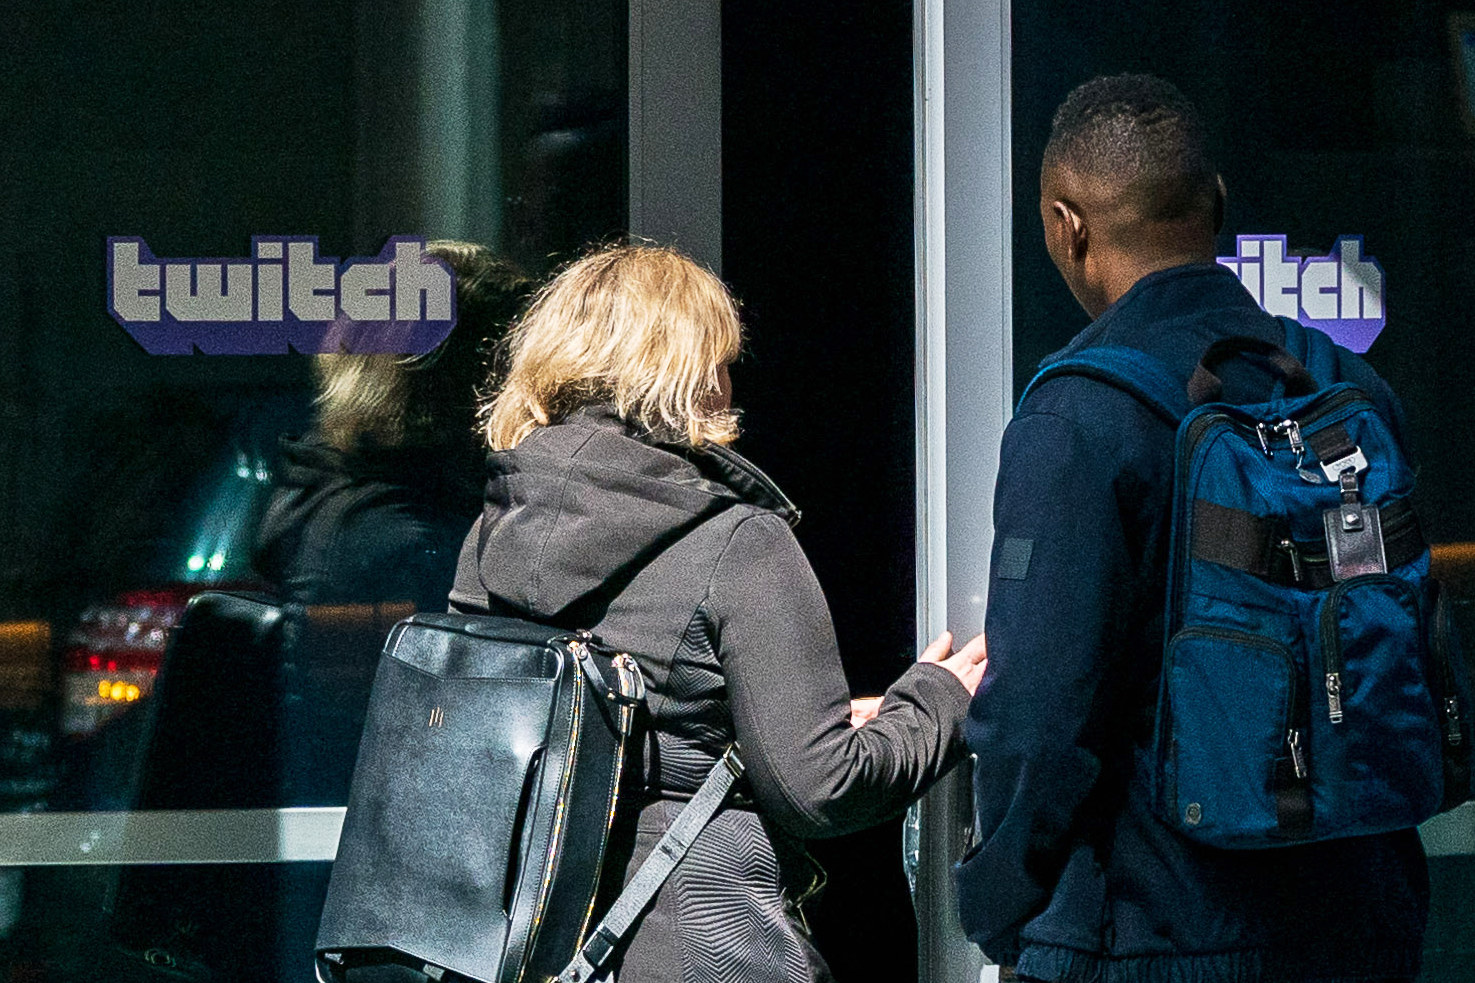 Two people are entering a building with a "Twitch" logo on the door.